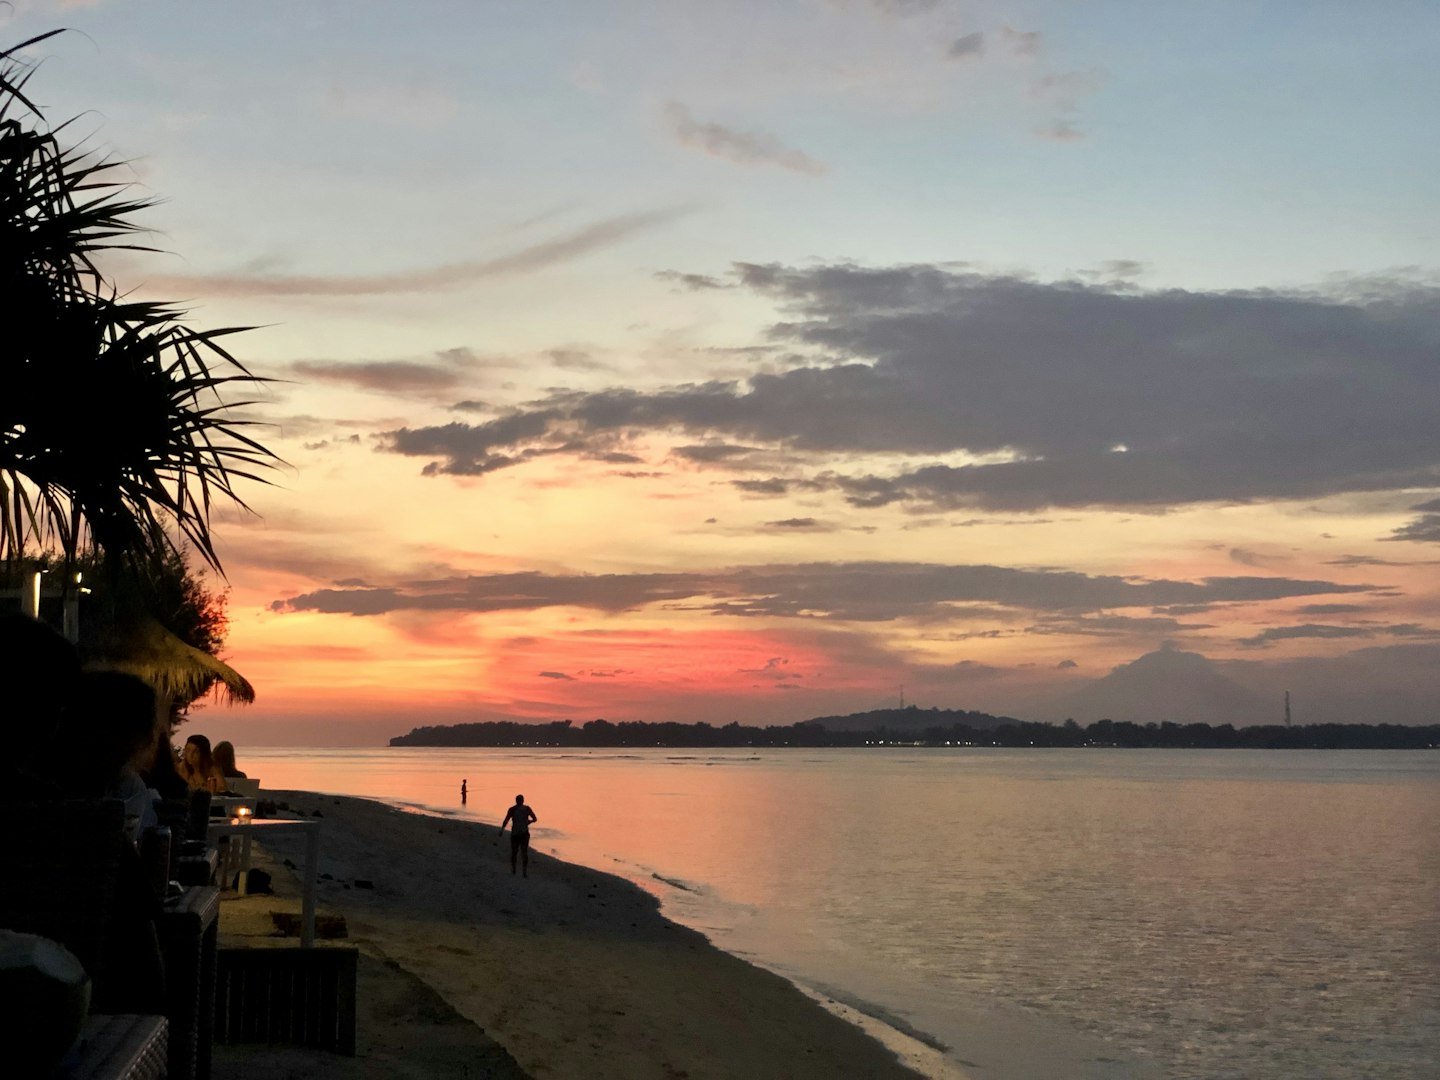 Sunset on Gili Air with view on Lombok